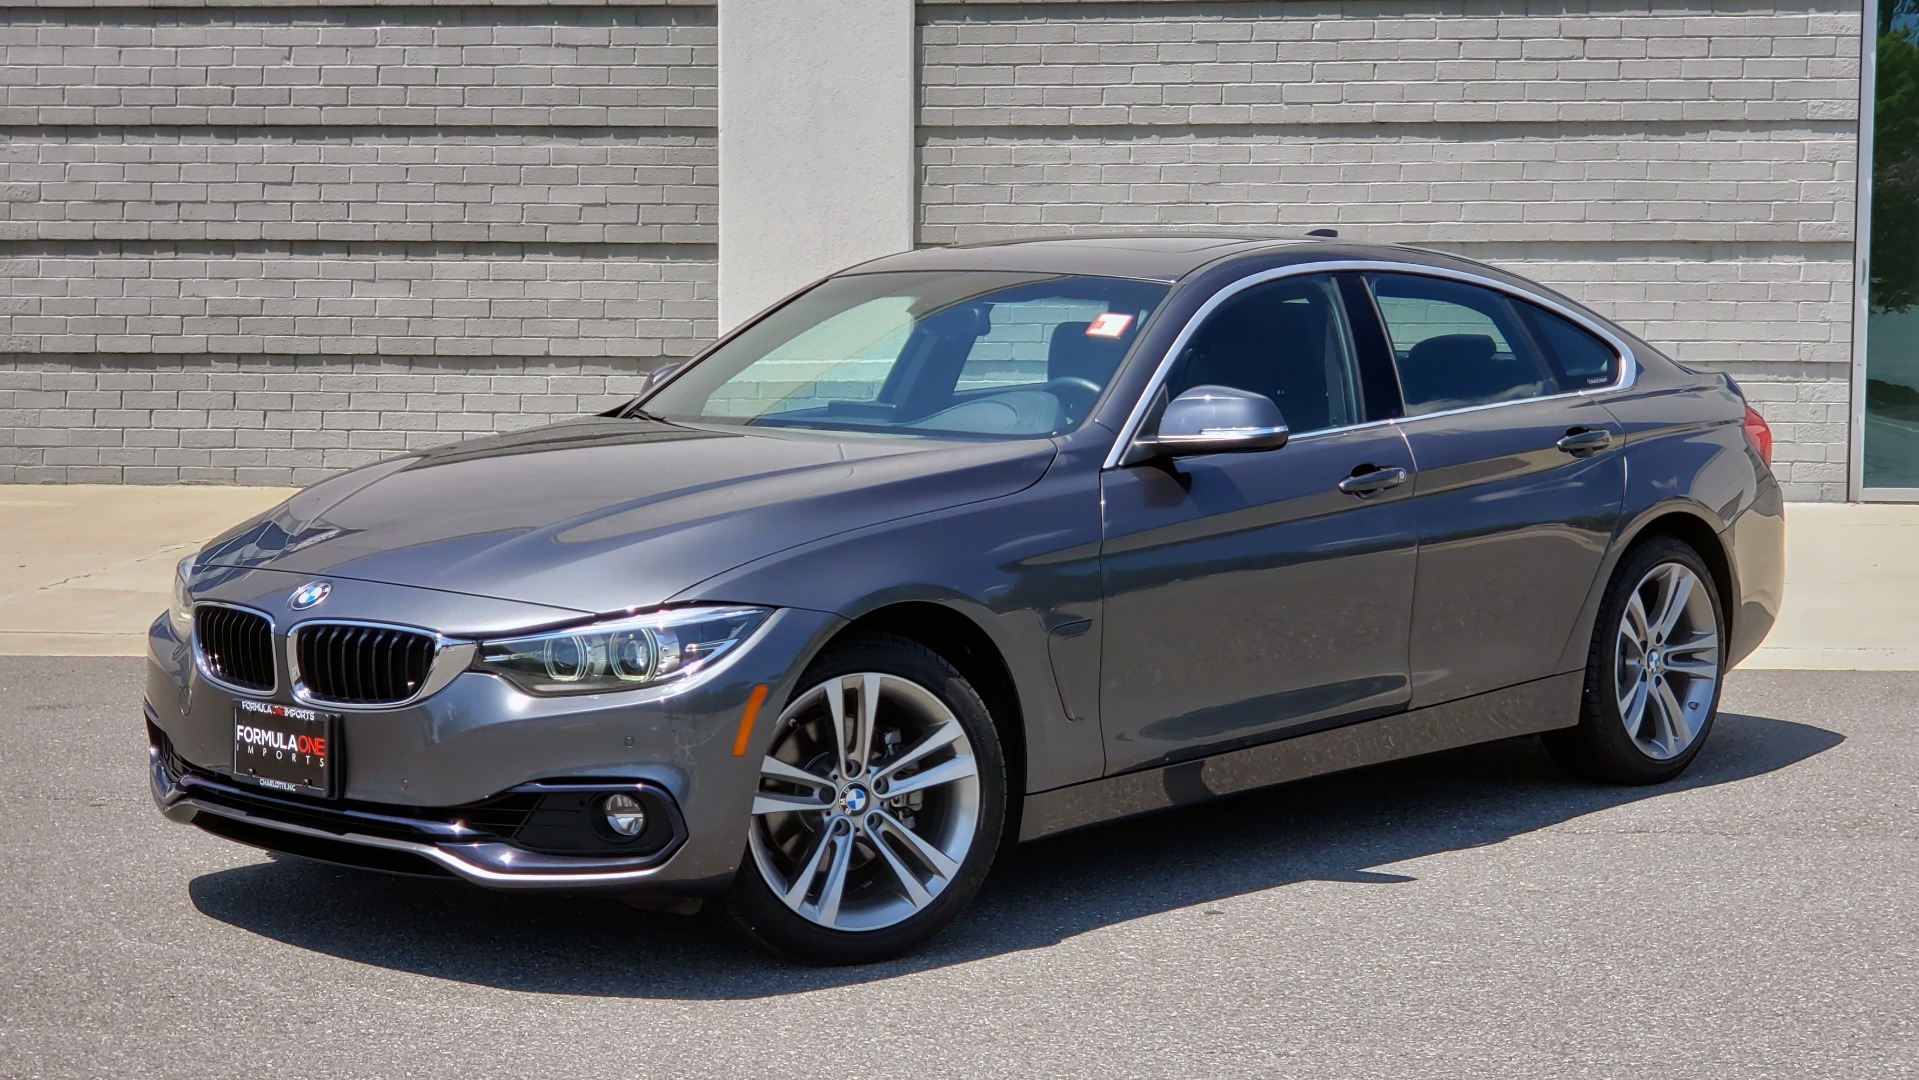 Used 2018 BMW 4 SERIES 430I XDRIVE PREMIUM / NAV / SUNROOF / HTD STS / PDC / REARVIEW for sale Sold at Formula Imports in Charlotte NC 28227 1